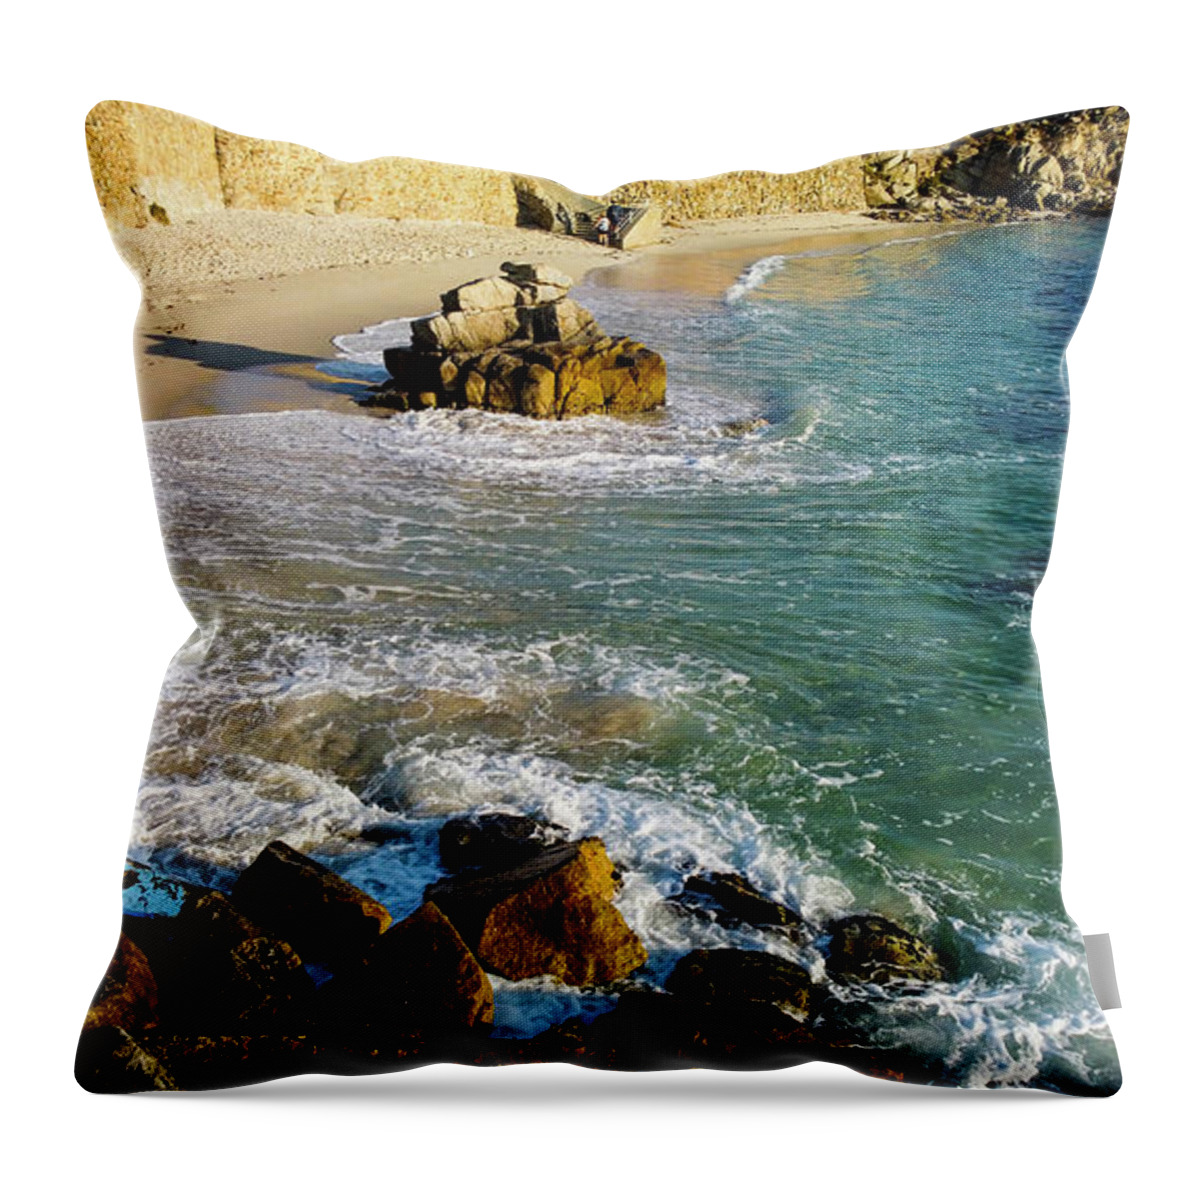 Lover's Point Throw Pillow featuring the photograph Lover's Point Beach by Dr Janine Williams